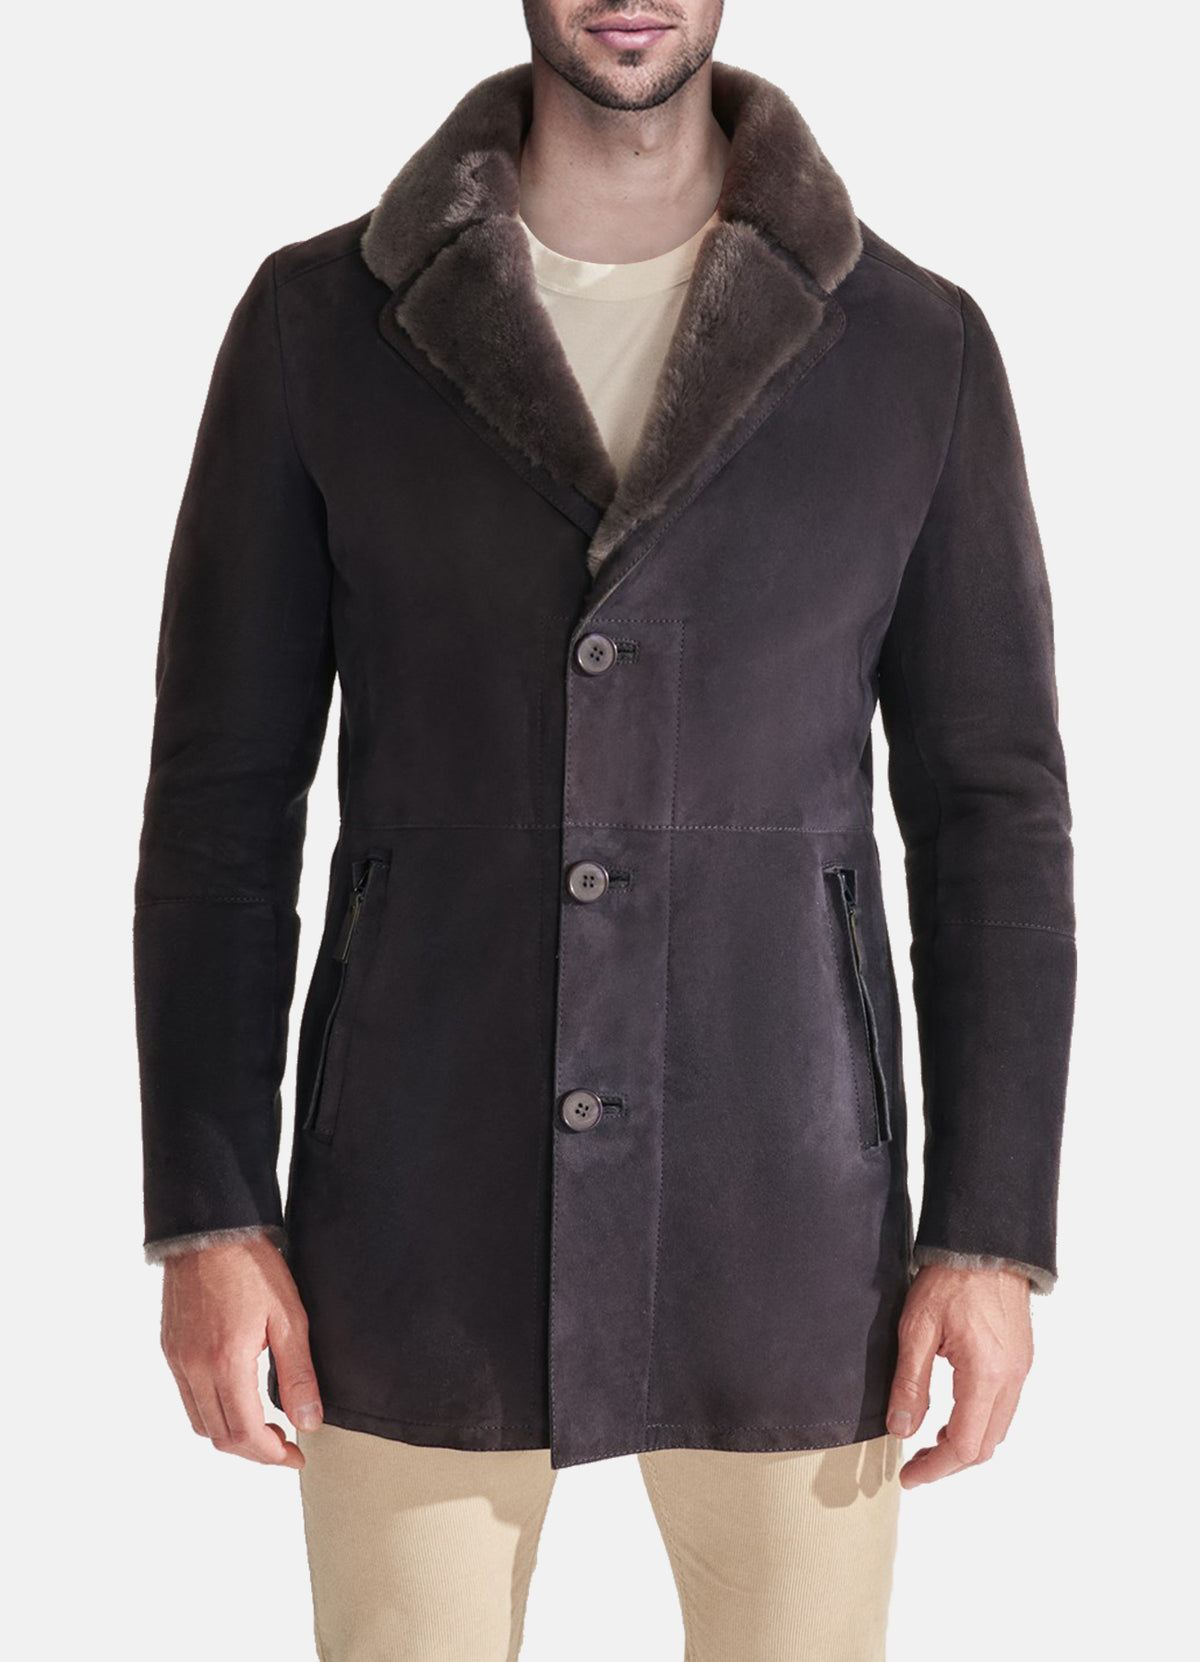 Mens Navy Blue Shearling Leather Coat